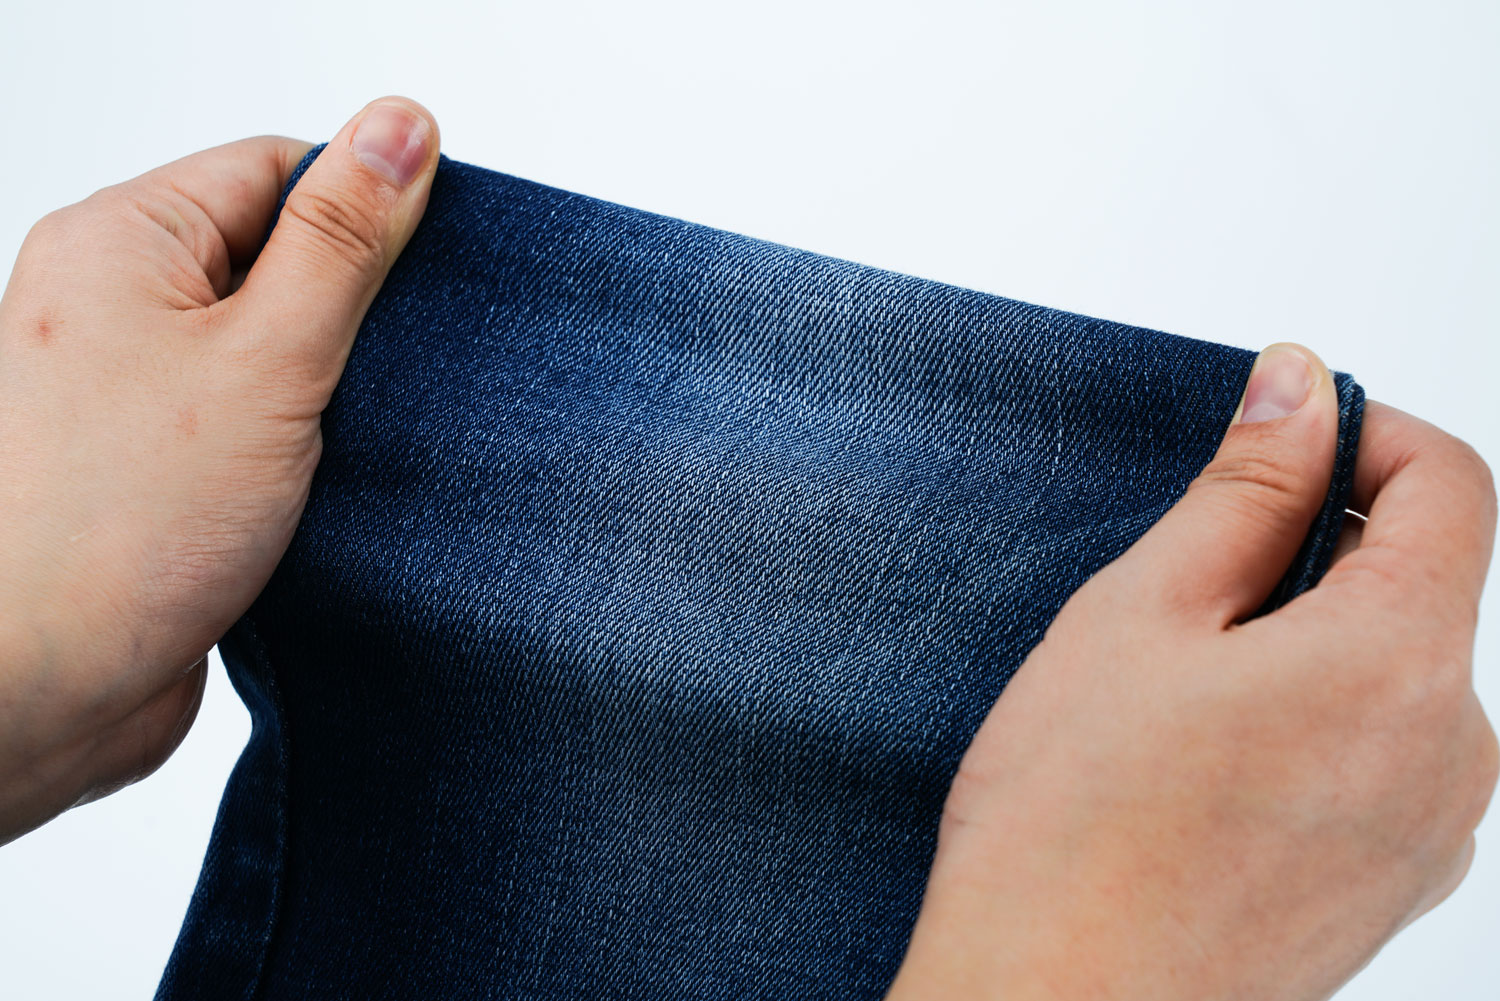 Reasons to Add Stretchable Denim Fabric to Your Work Today 1